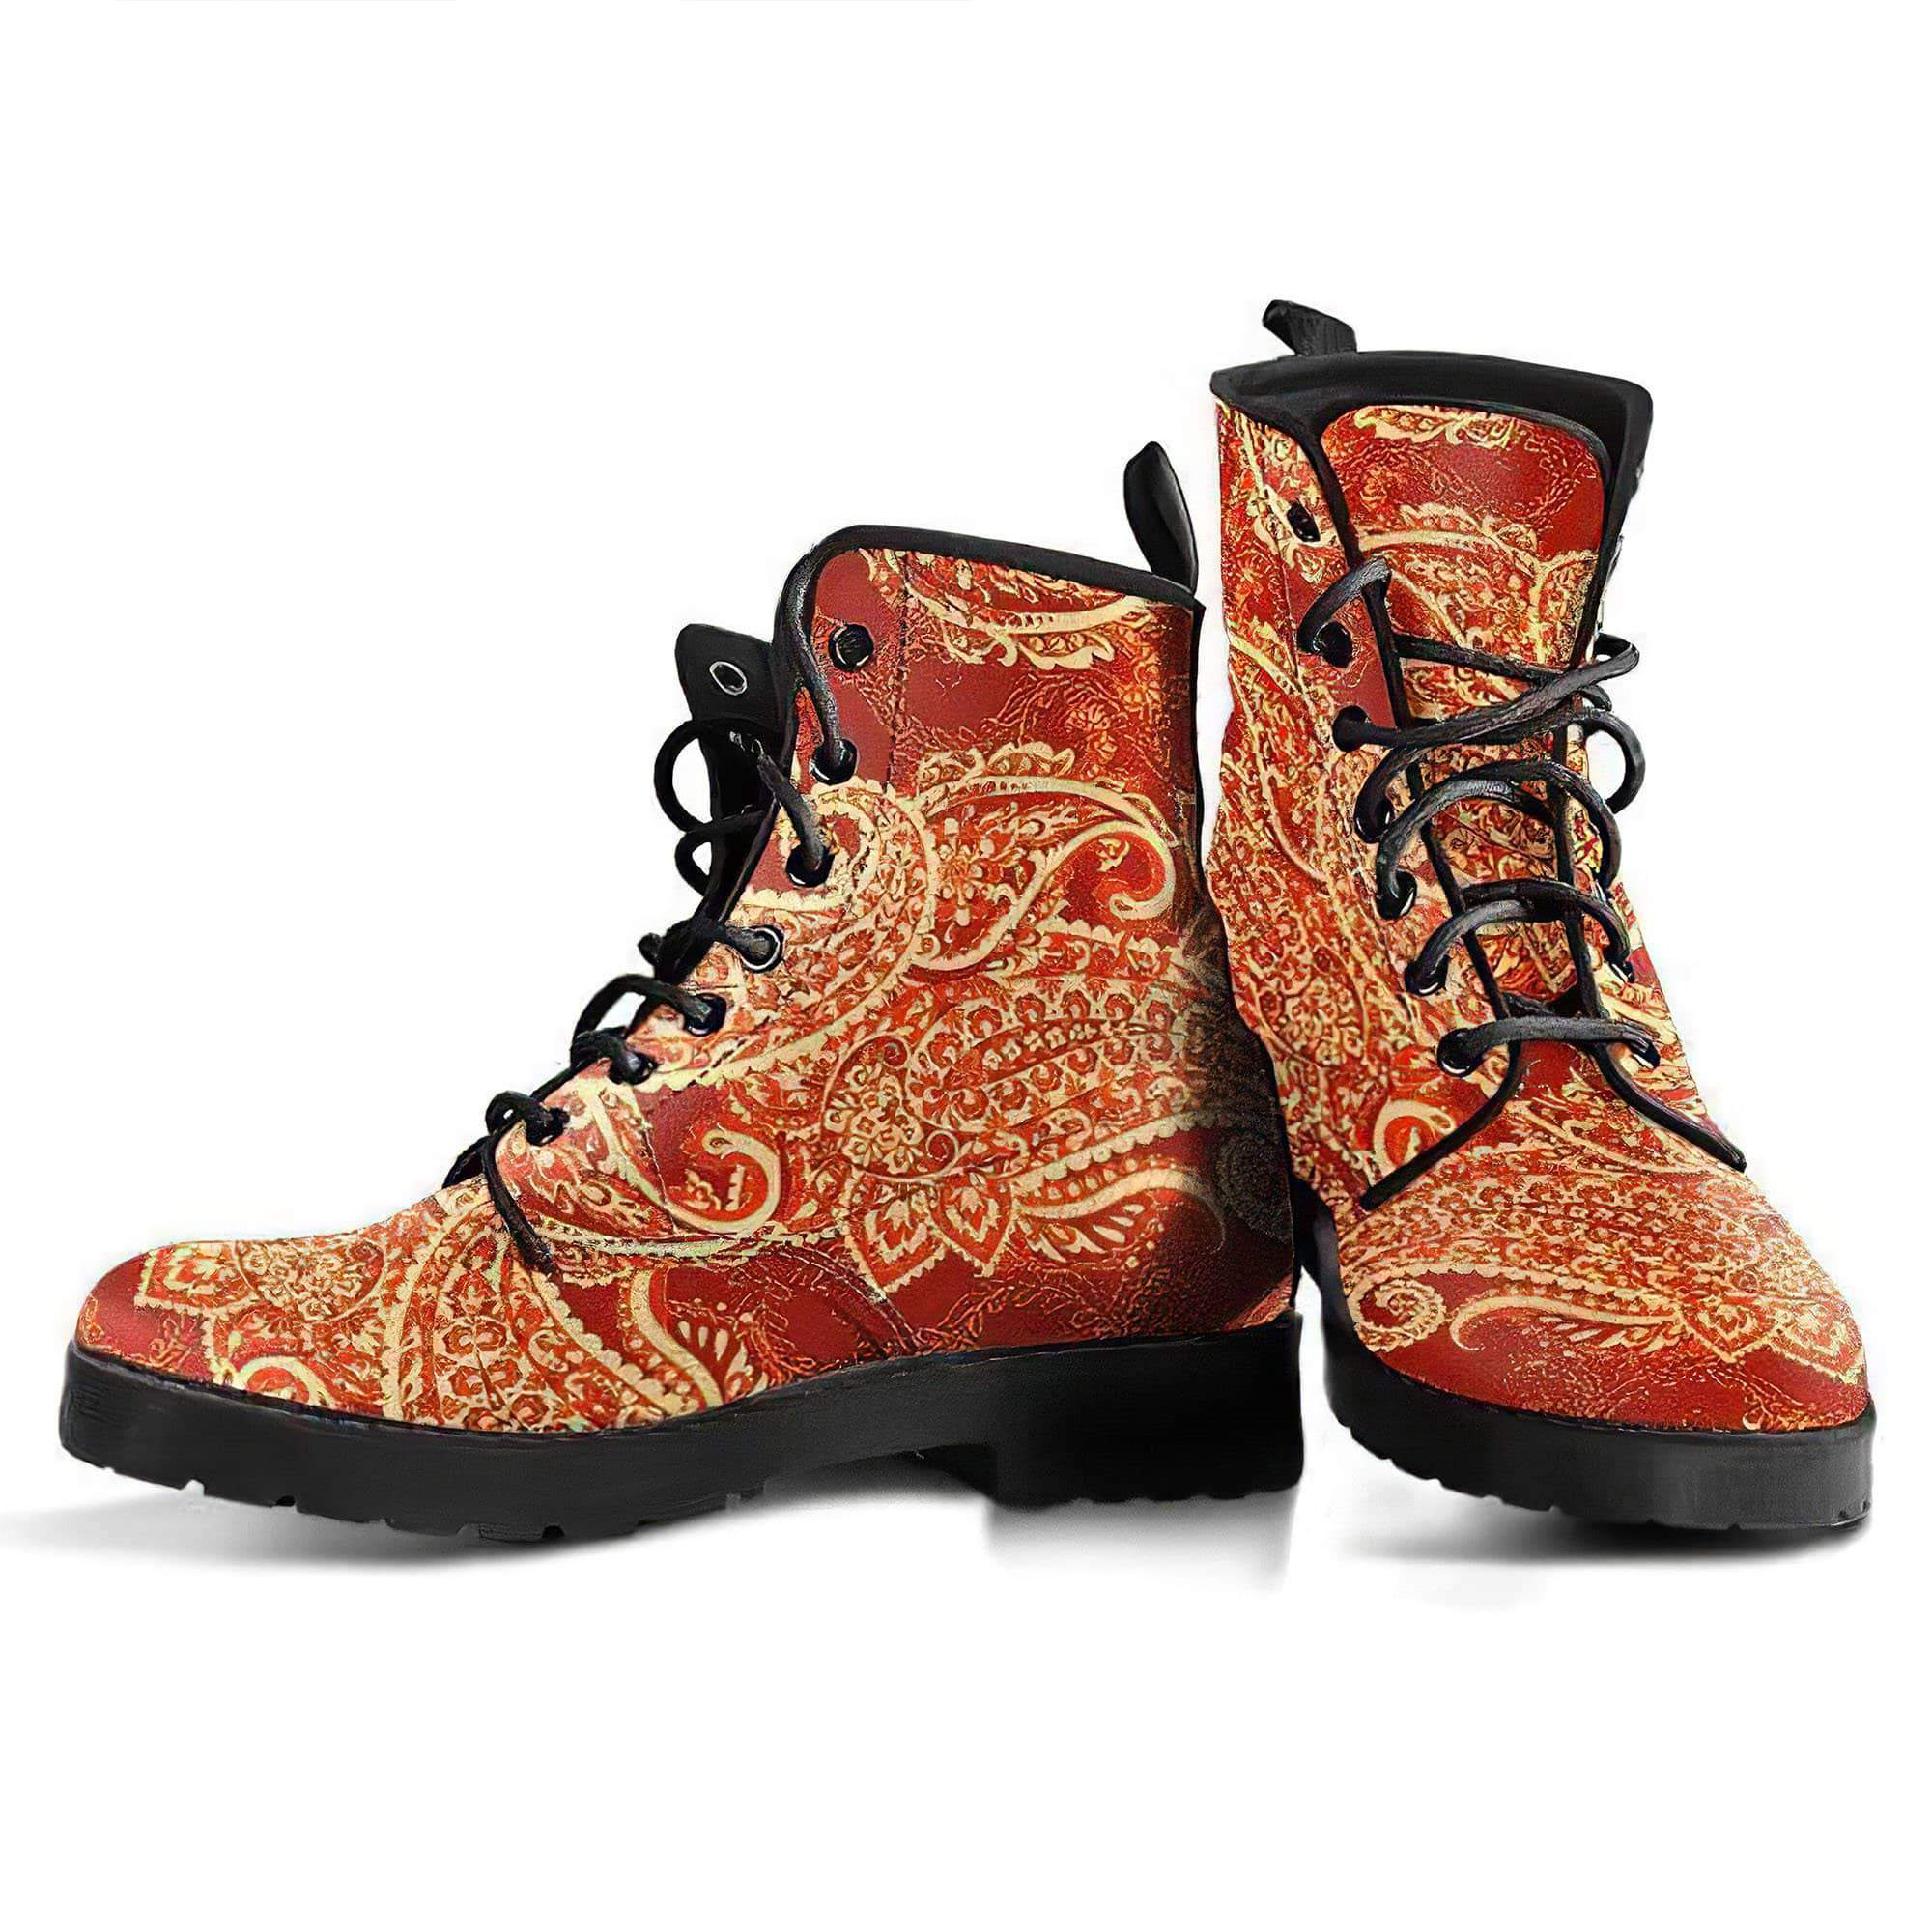 red-paisley-mandala-handcrafted-boots-women-s-leather-boots-12051944439869.jpg